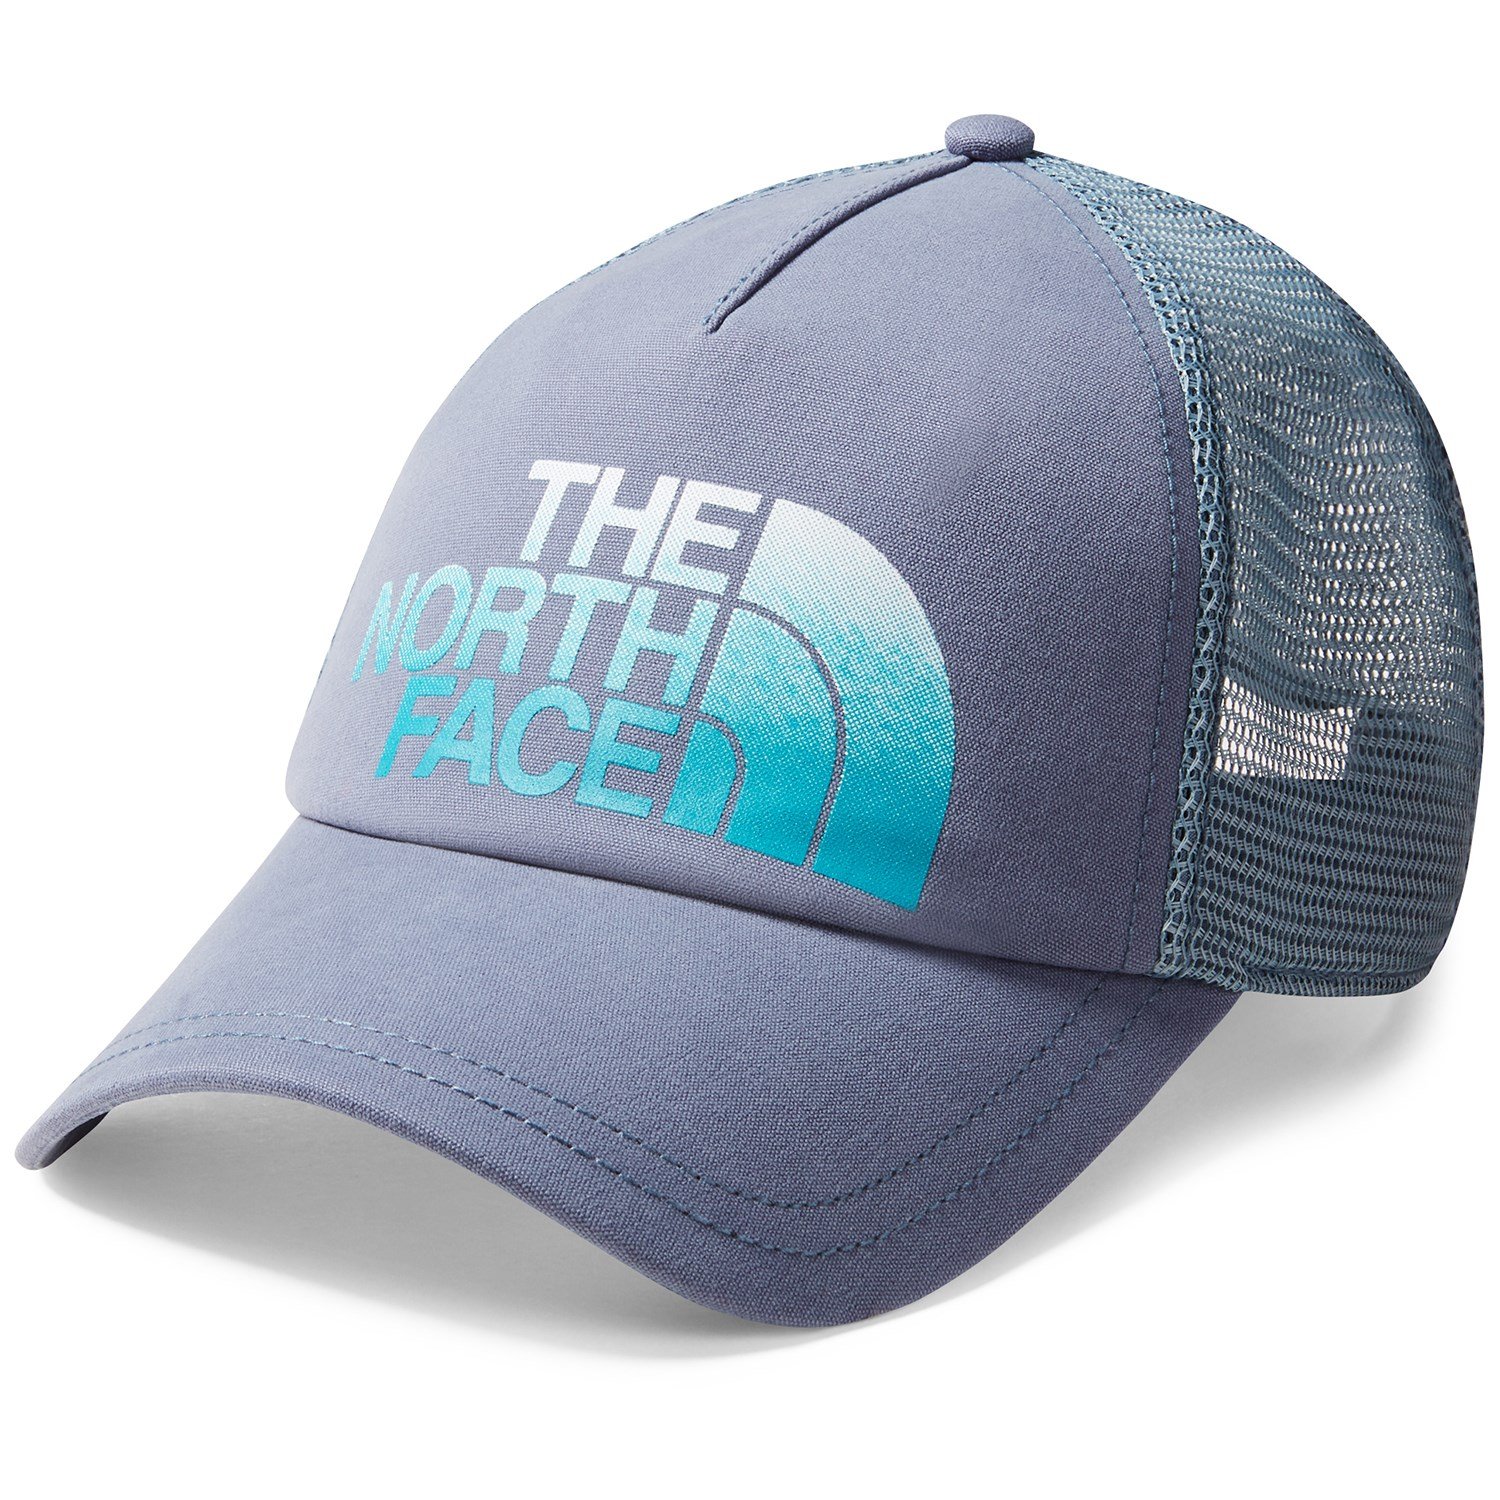 The North Face Low Pro Trucker Hat 